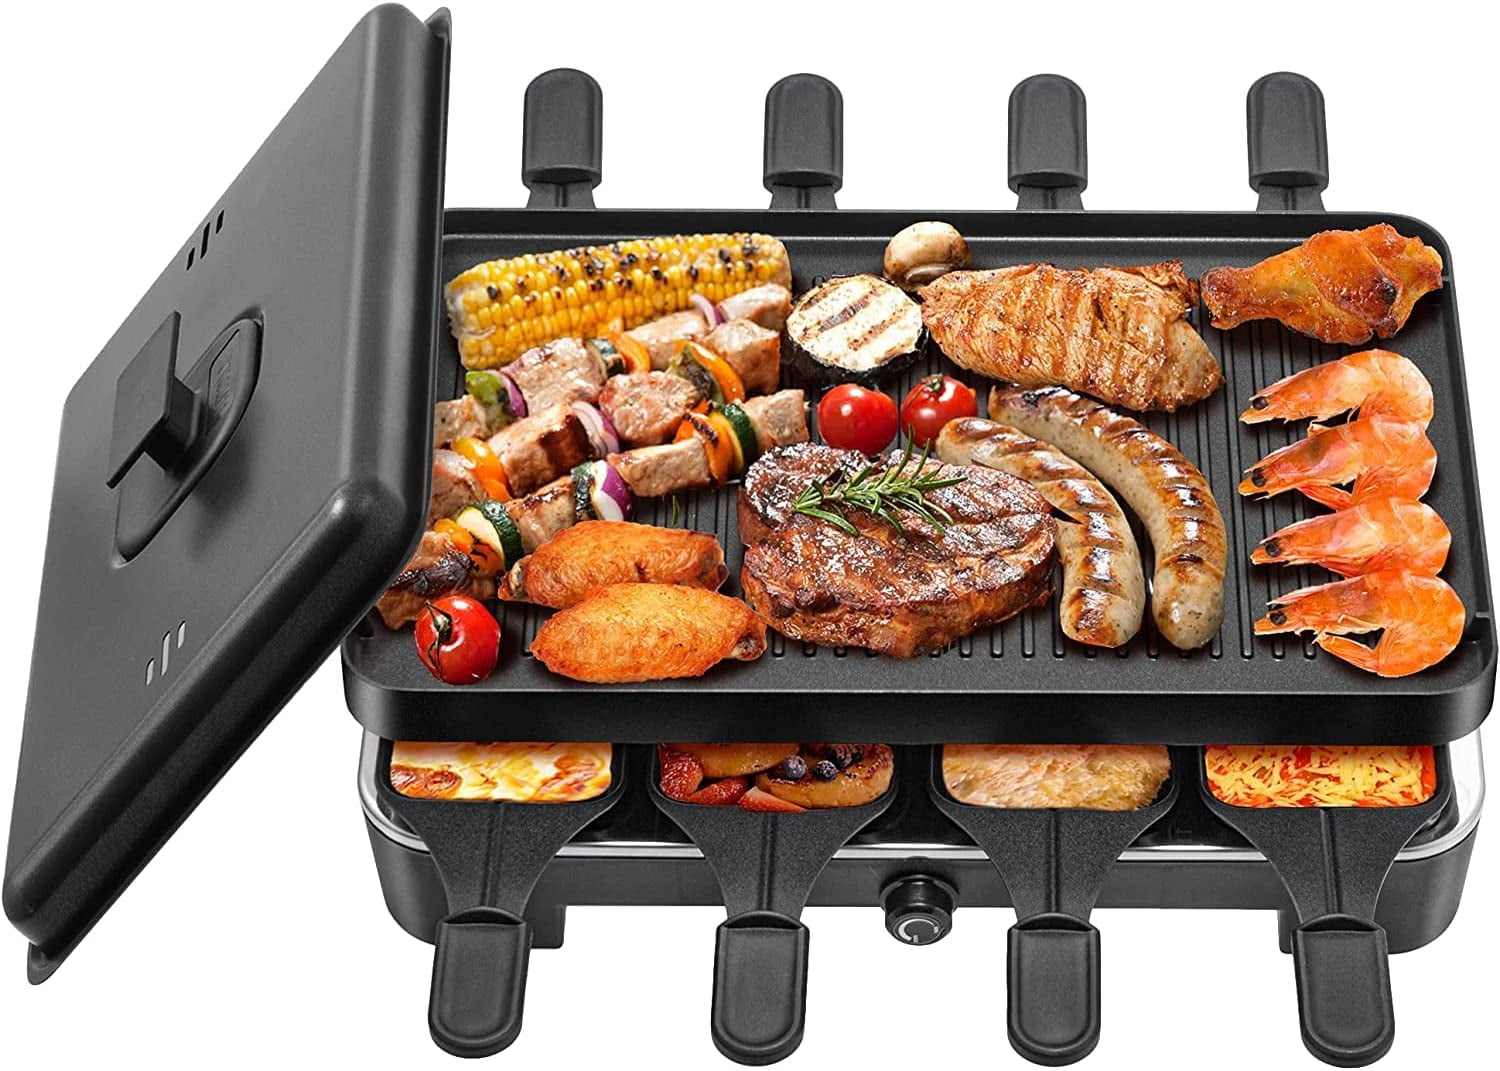 empty Household Electric Grill Portable Indoor smokeless Barbecue Small Baking Tray 4 Multi-Person Dinner Barbecue Equipment 